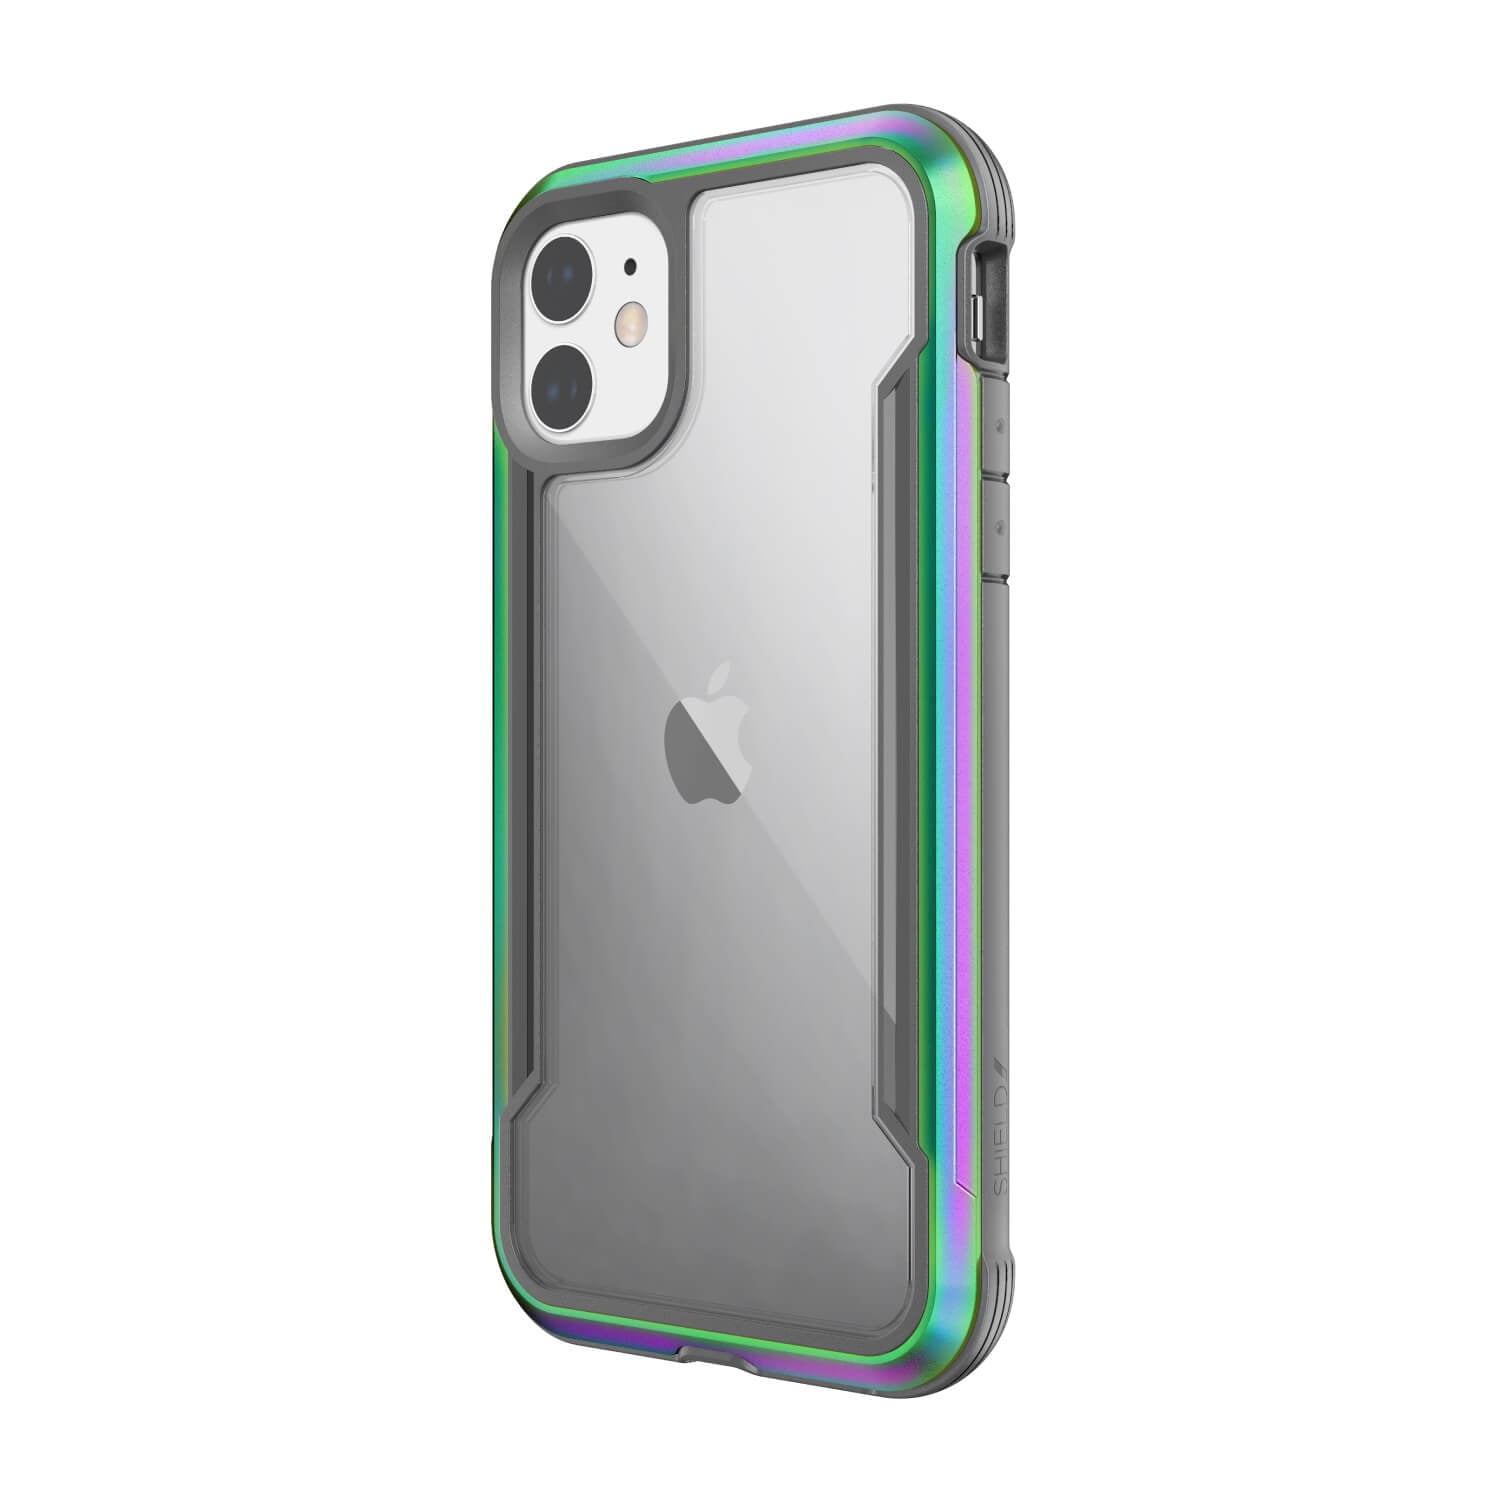 Raptic Shield Case Compatible with iPhone 11 Case, Shock Absorbing Protection, Durable Aluminum Frame, 10ft Drop Tested, Fits iPhone 11, Iridescent